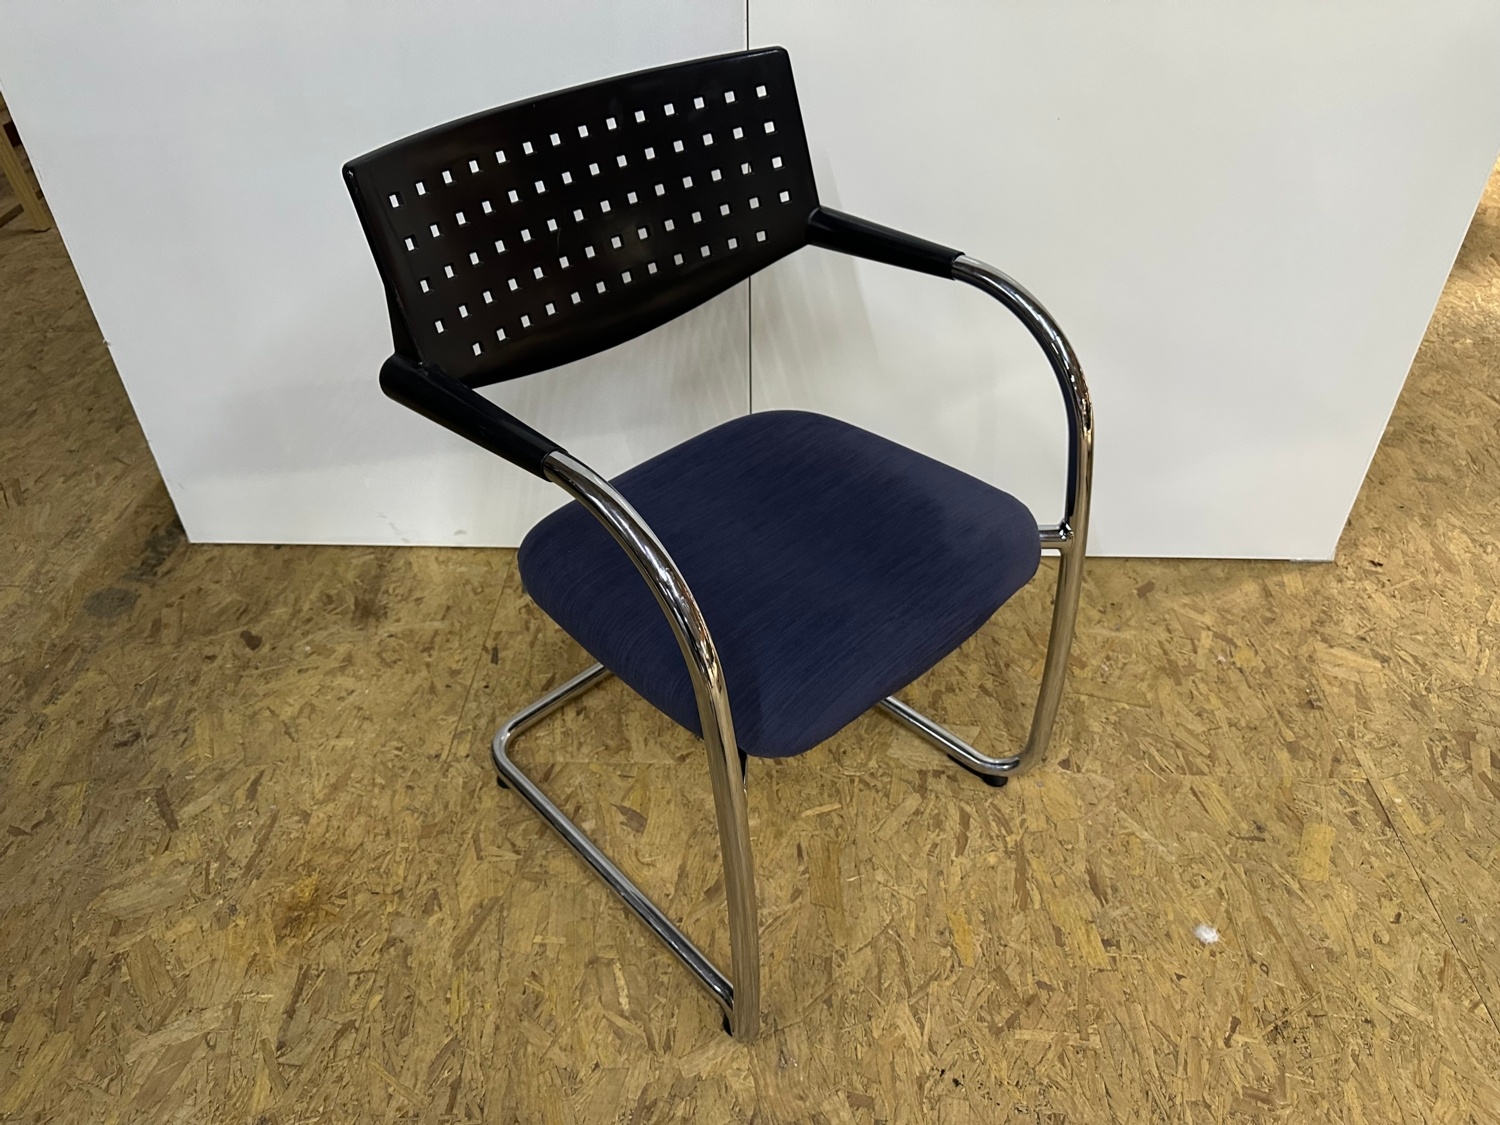 Basic second hand small office chair